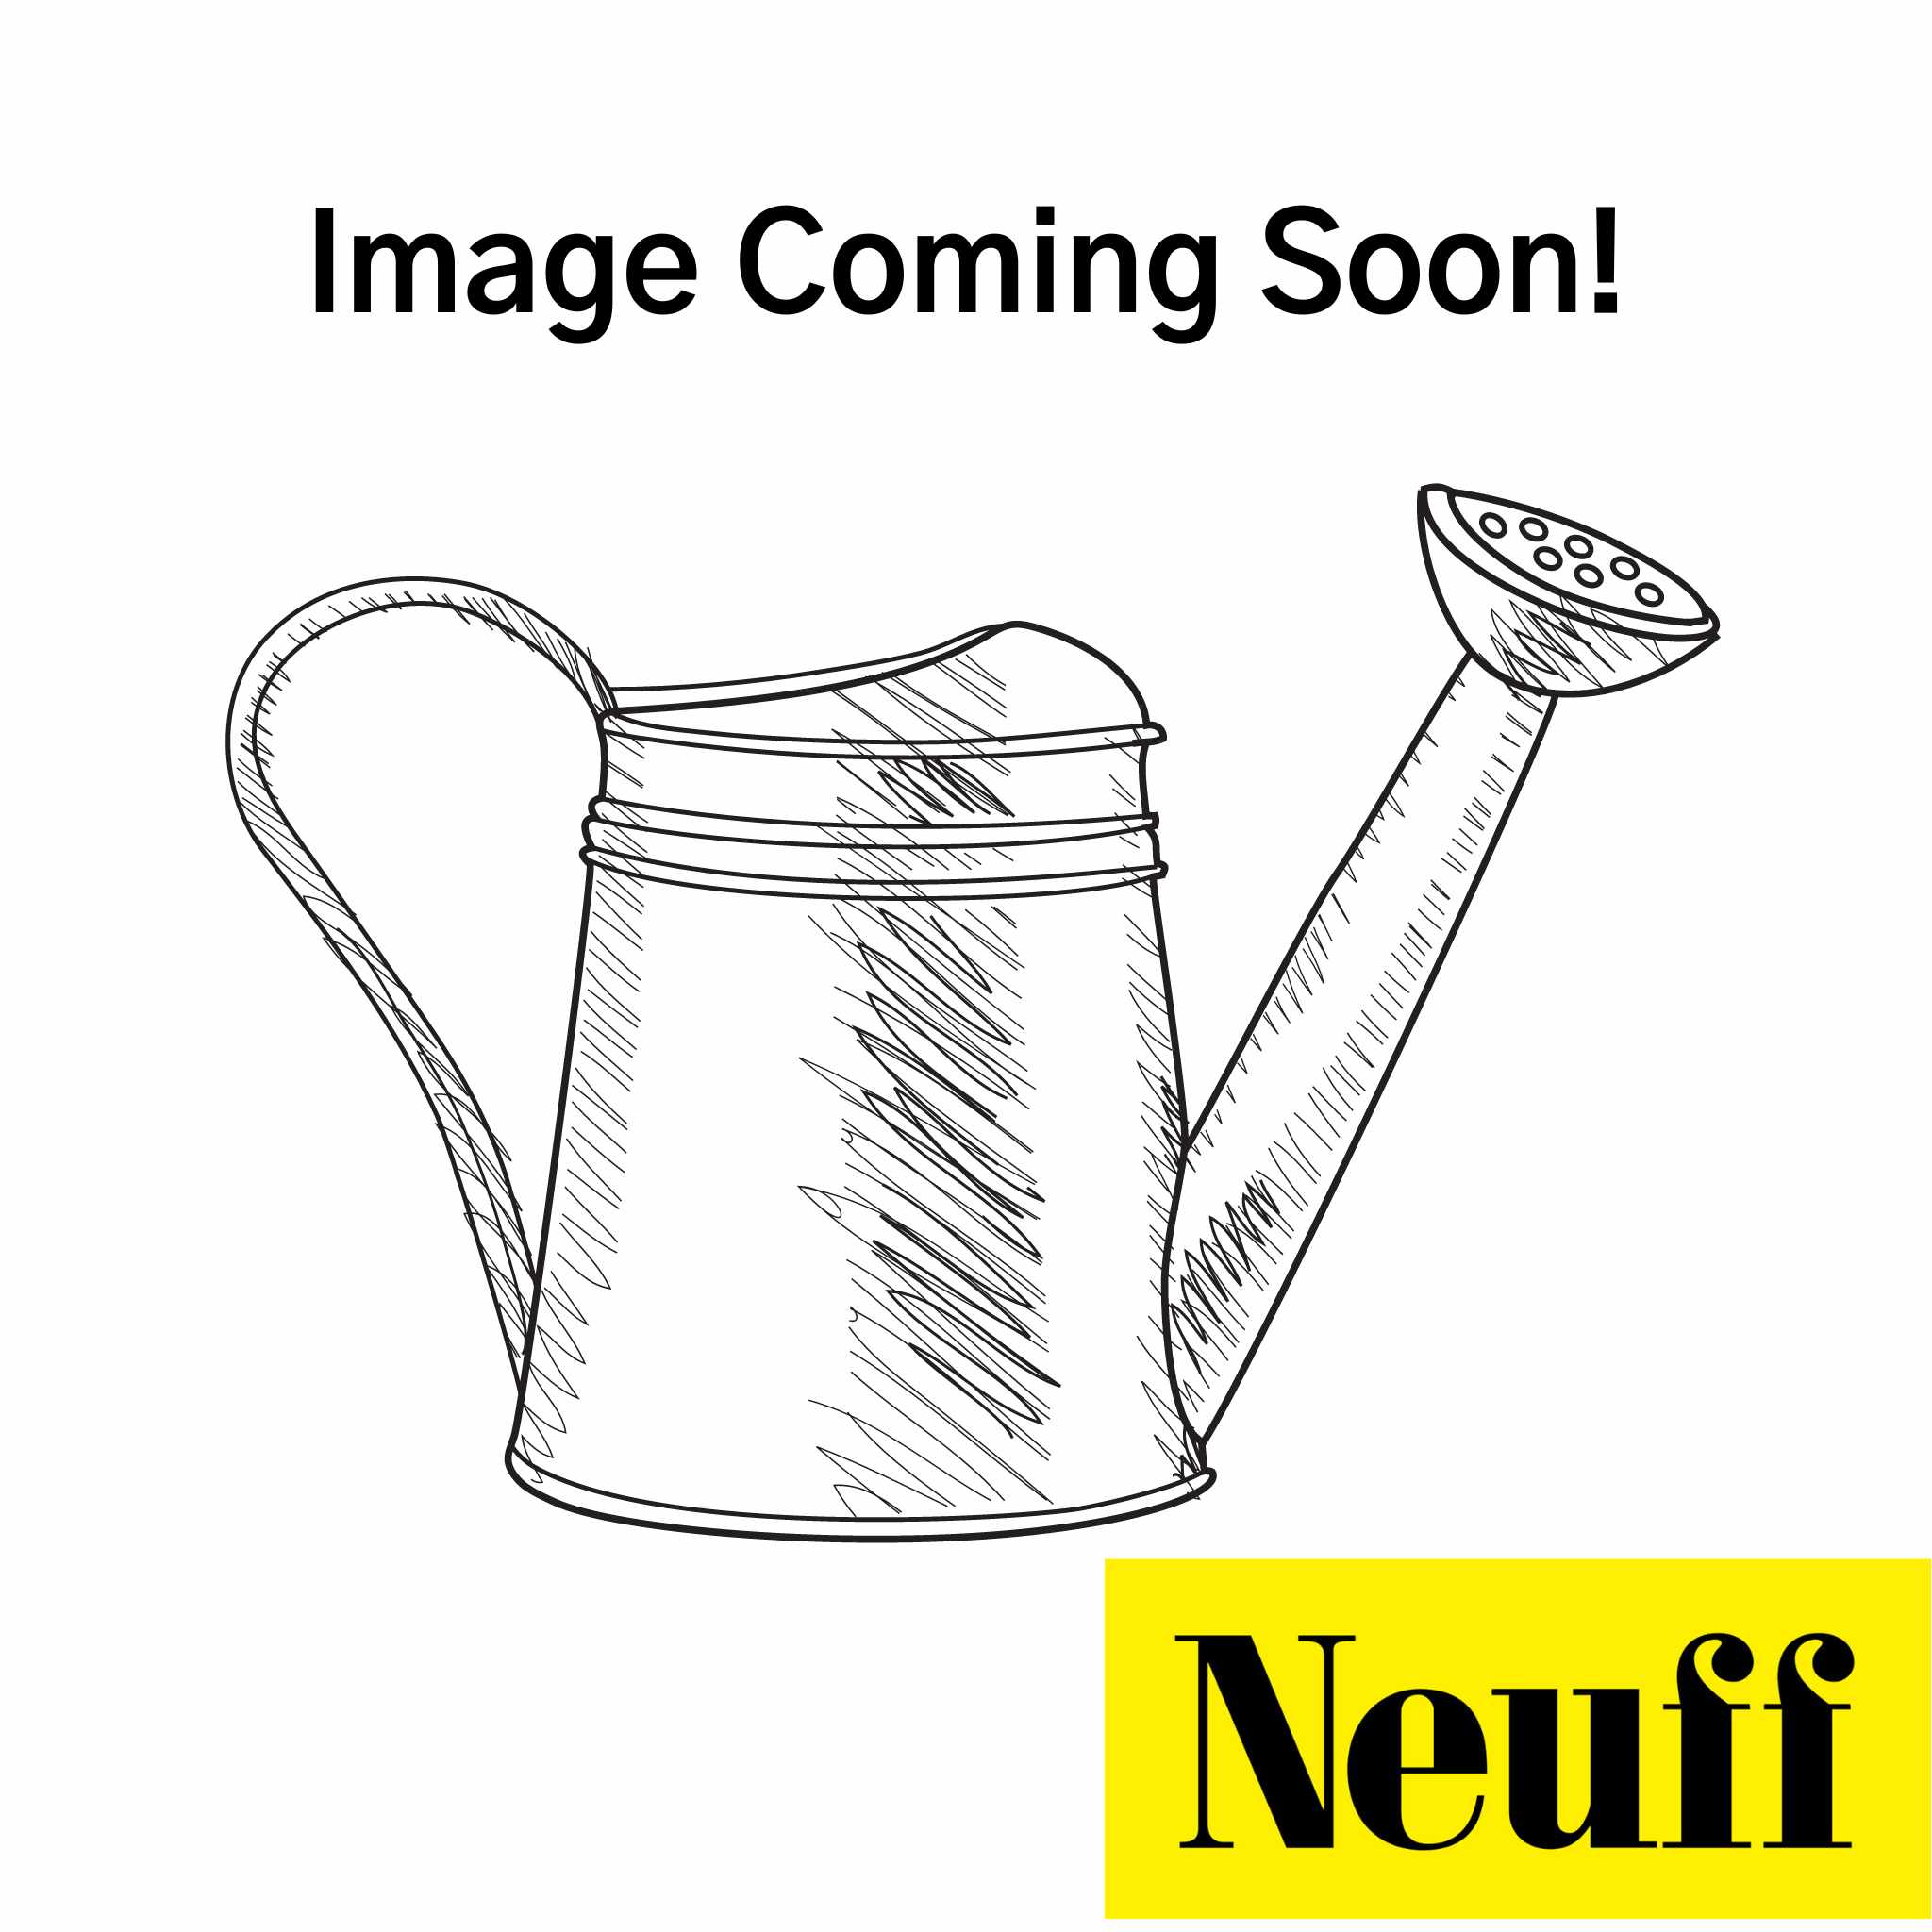 watering can image | for sand pits